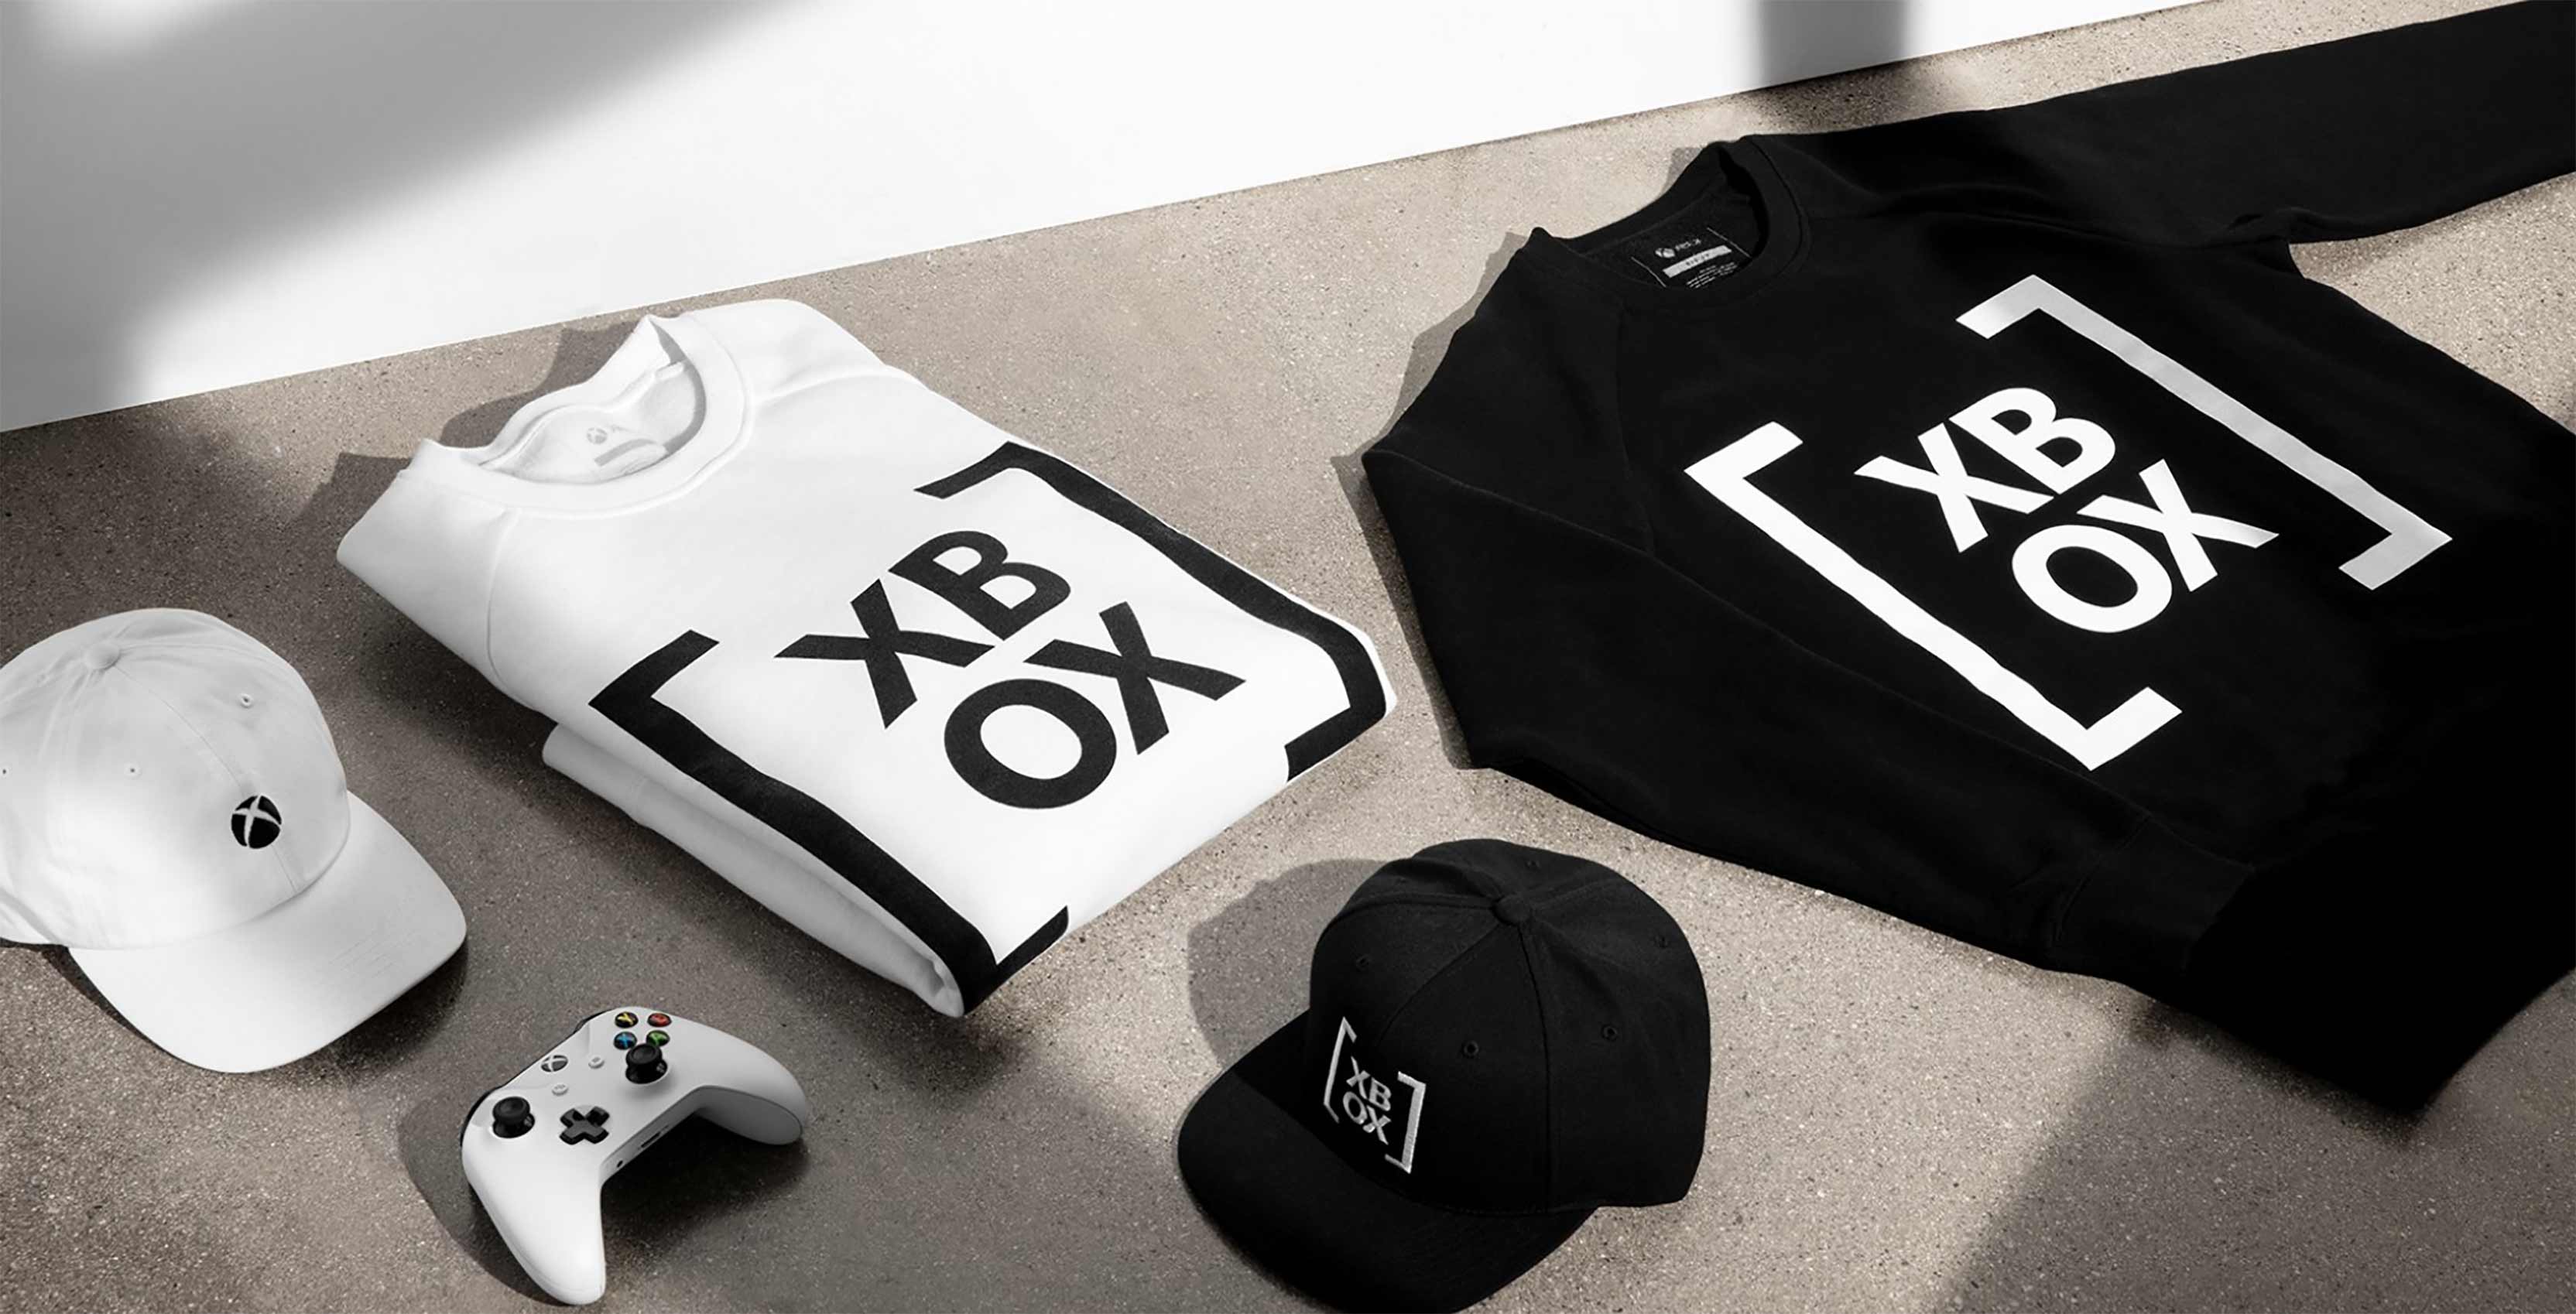 official Xbox merch store in Canada